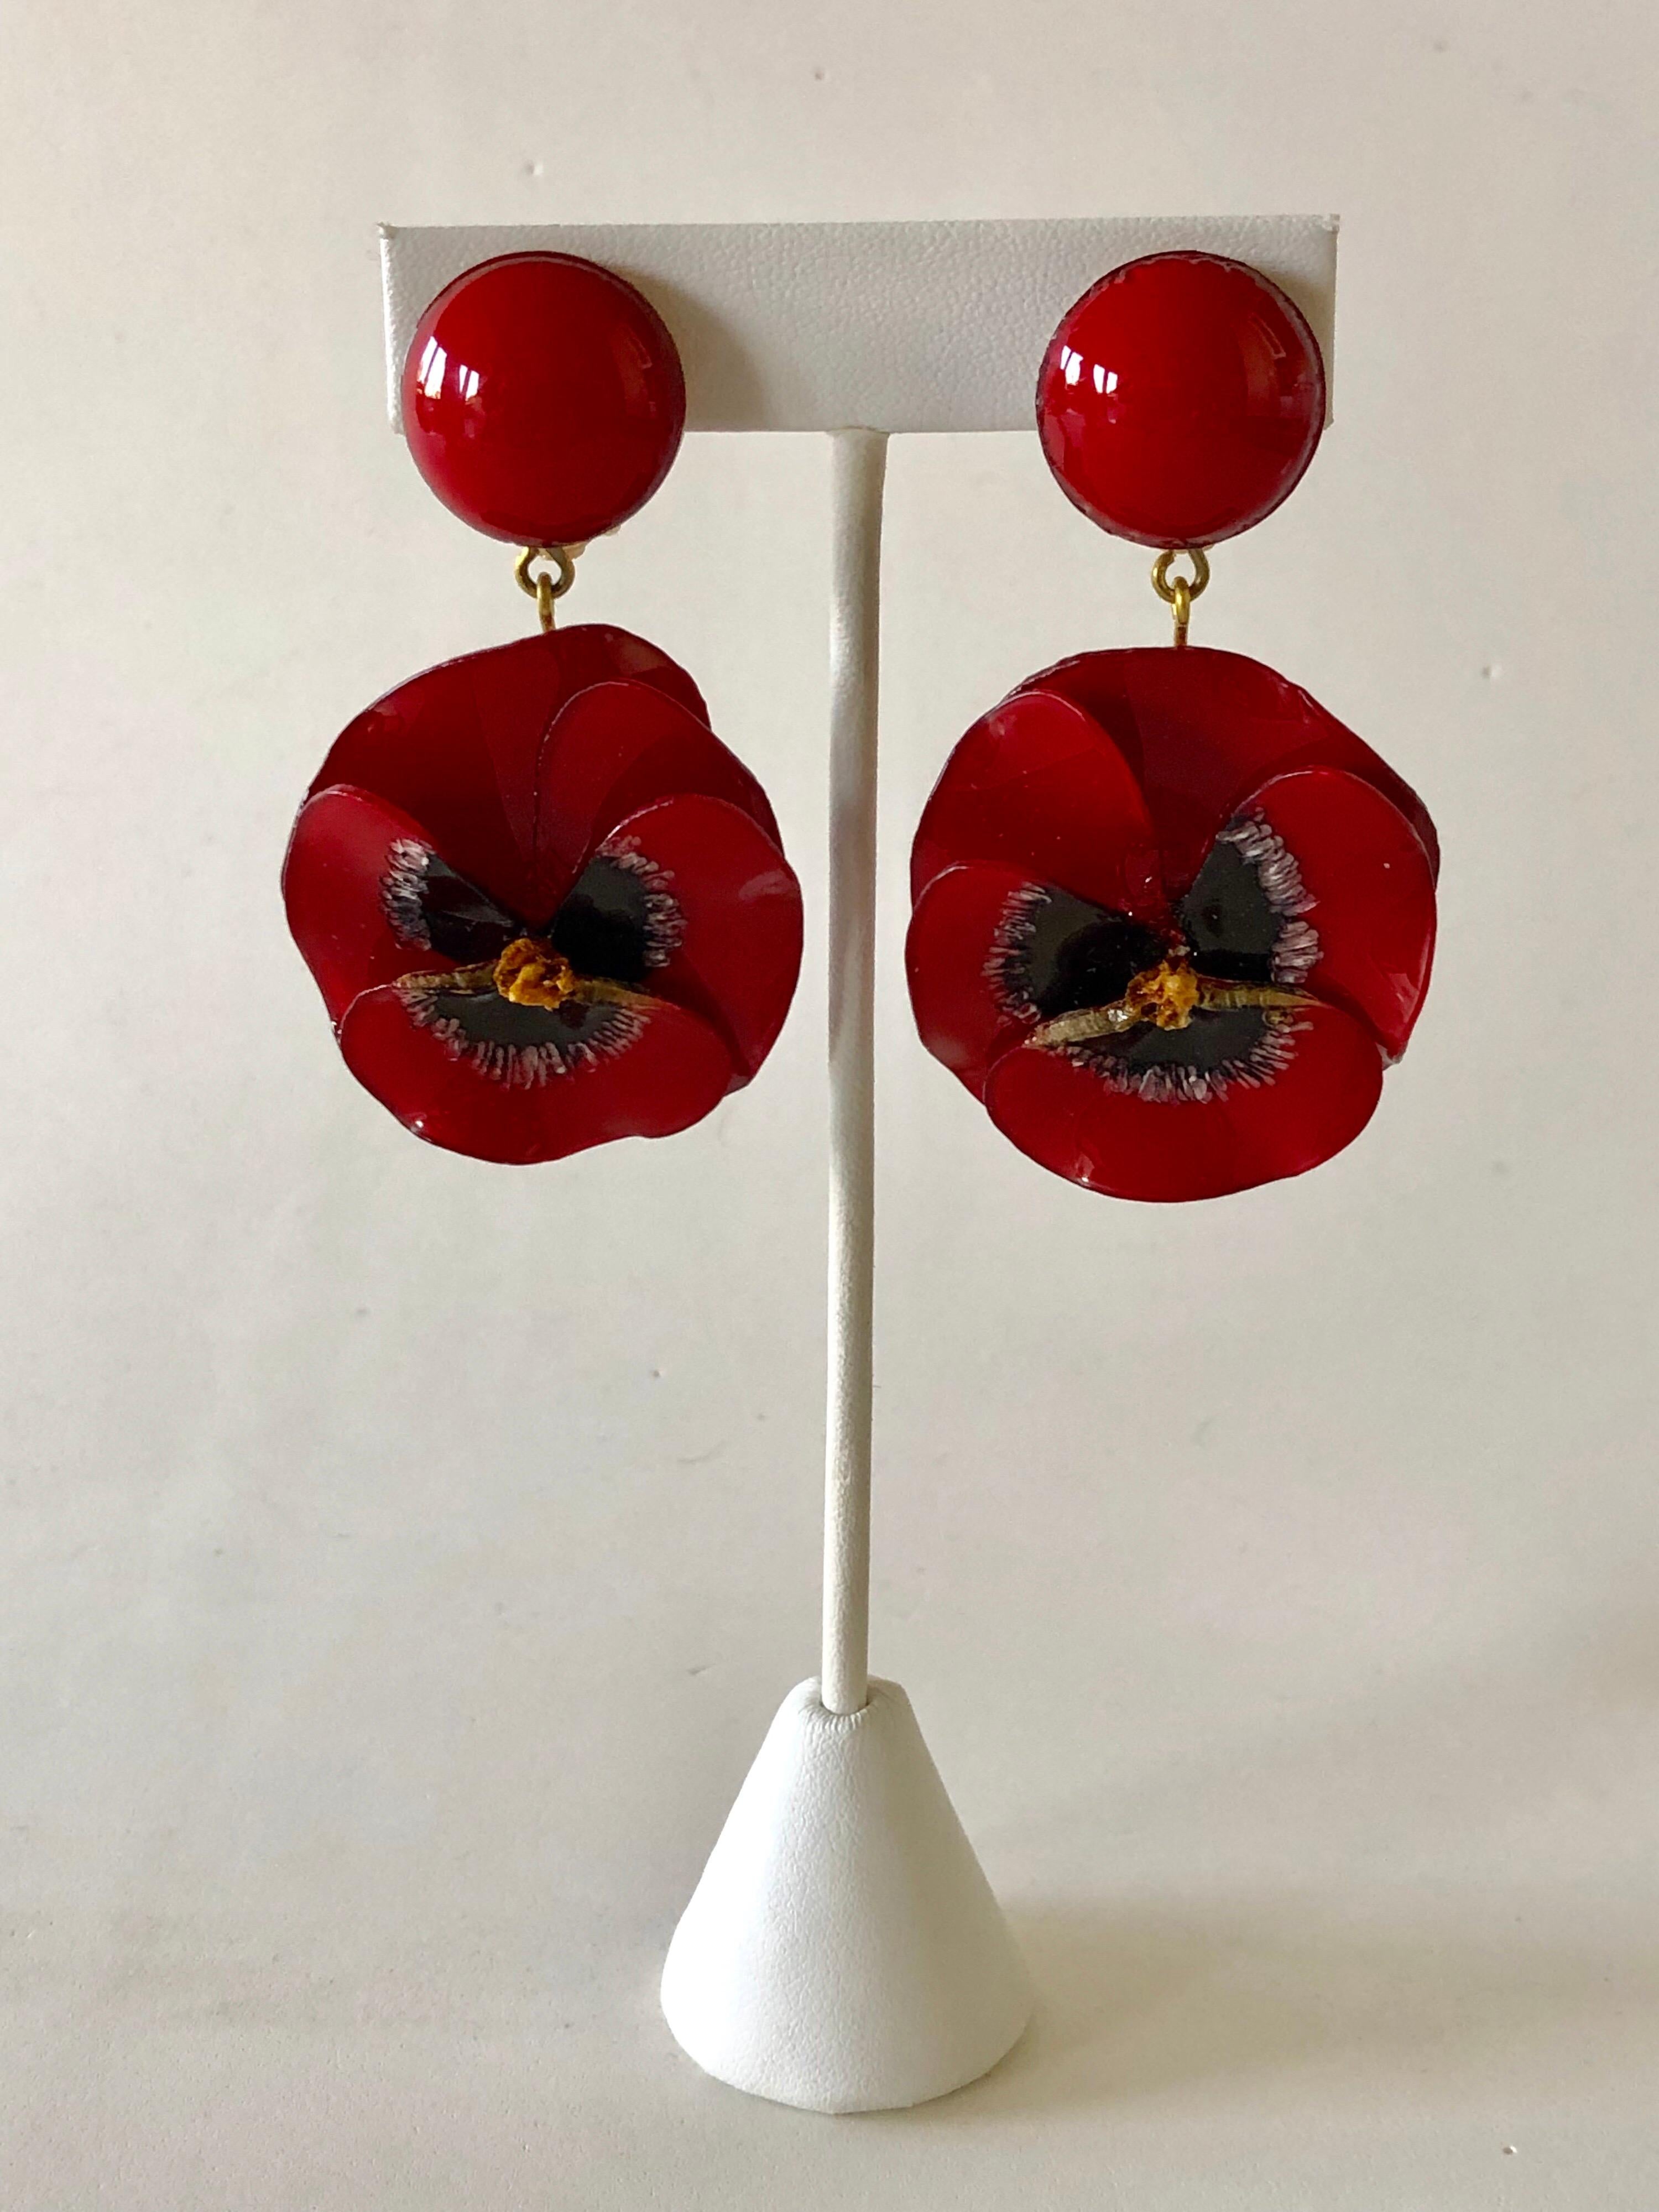 Light and easy to wear, these contemporary handmade fashion forward artisanal clip-on earrings were made in Paris by Cilea. The earrings feature two detailed and whimsical enameline (enamel and resin composite) red pansies. Like all Cilea pieces,